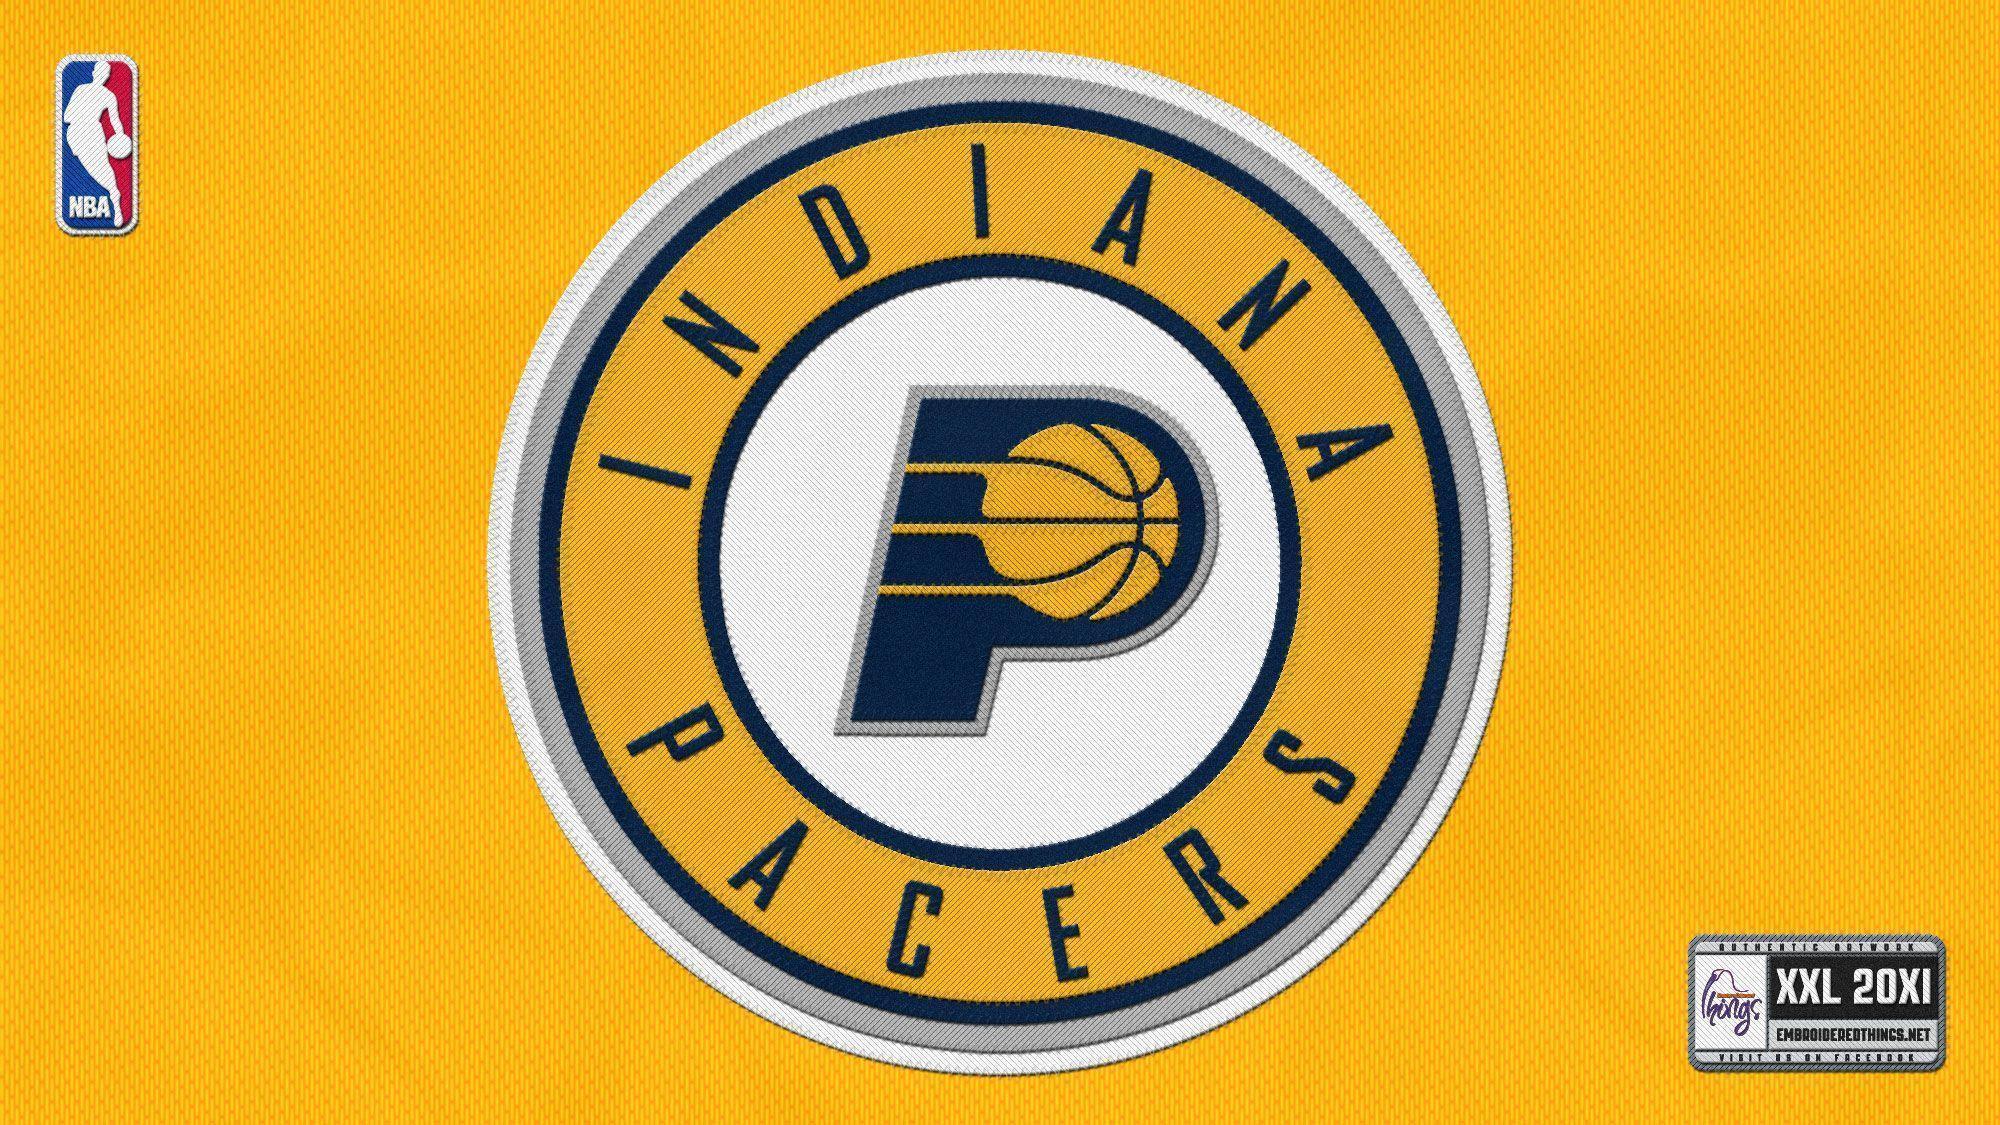 Indiana Pacers scores